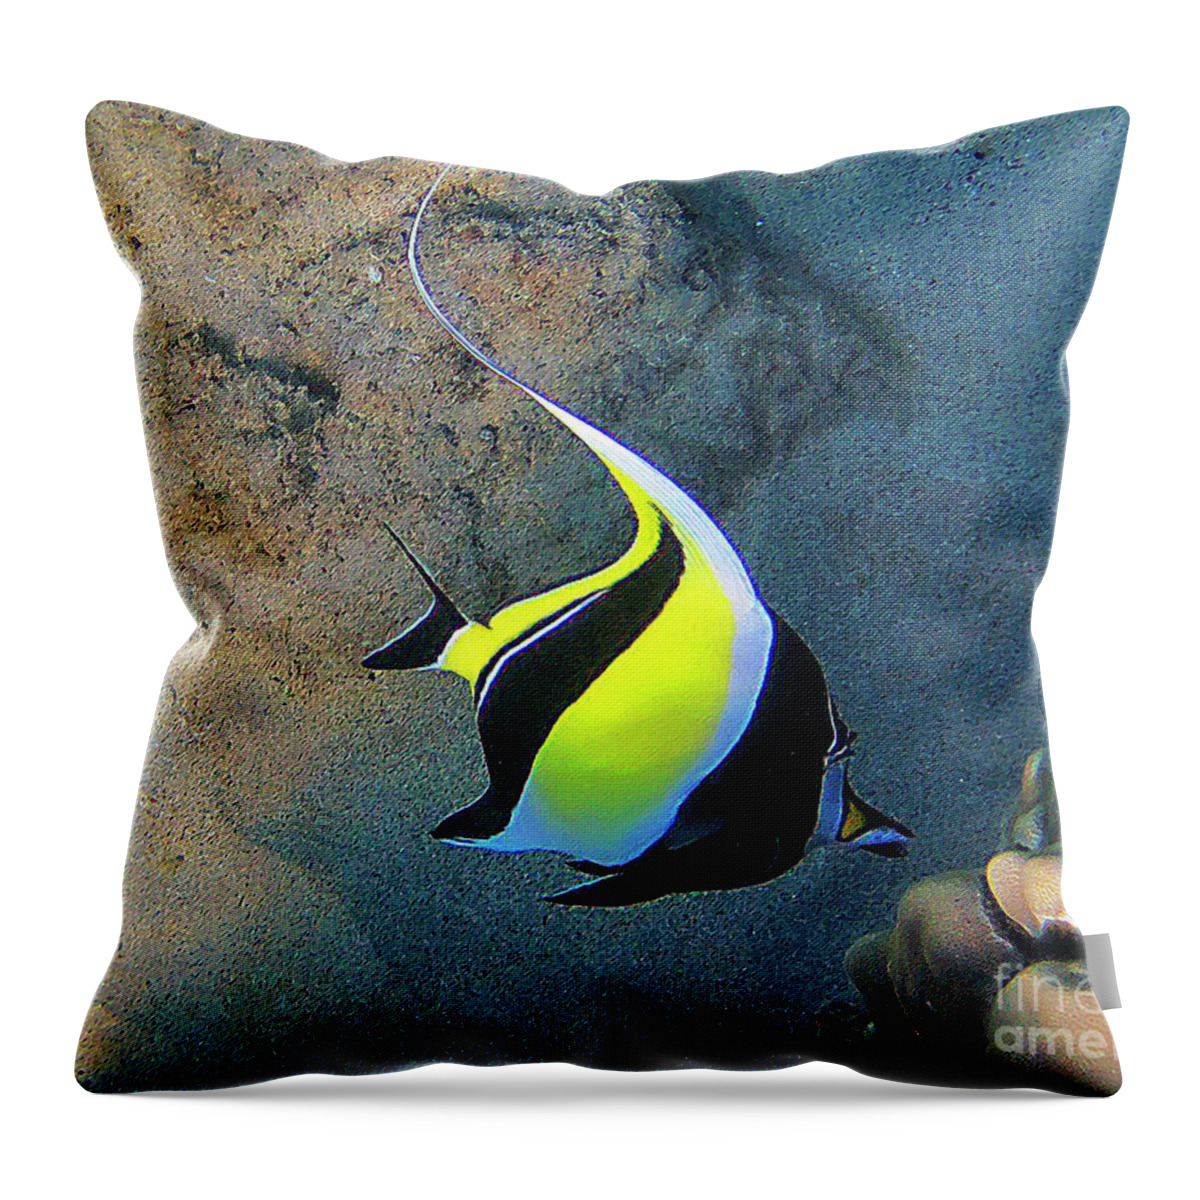 Tropical Fish Throw Pillow featuring the photograph Exotic Reef Fish by Bette Phelan